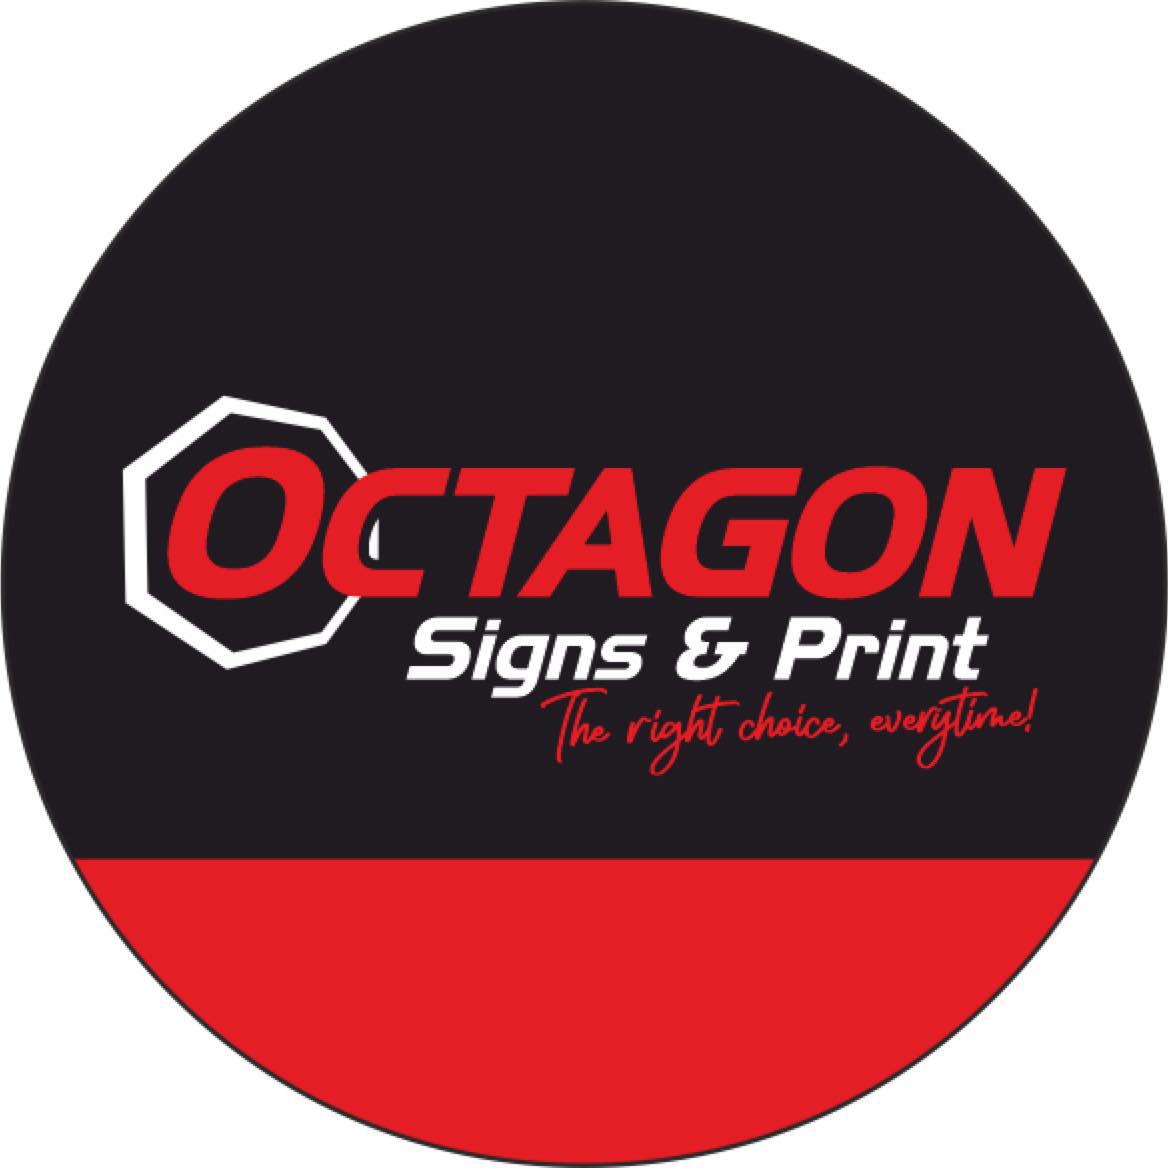 Octagon Signs And Print Ely 01353 930270